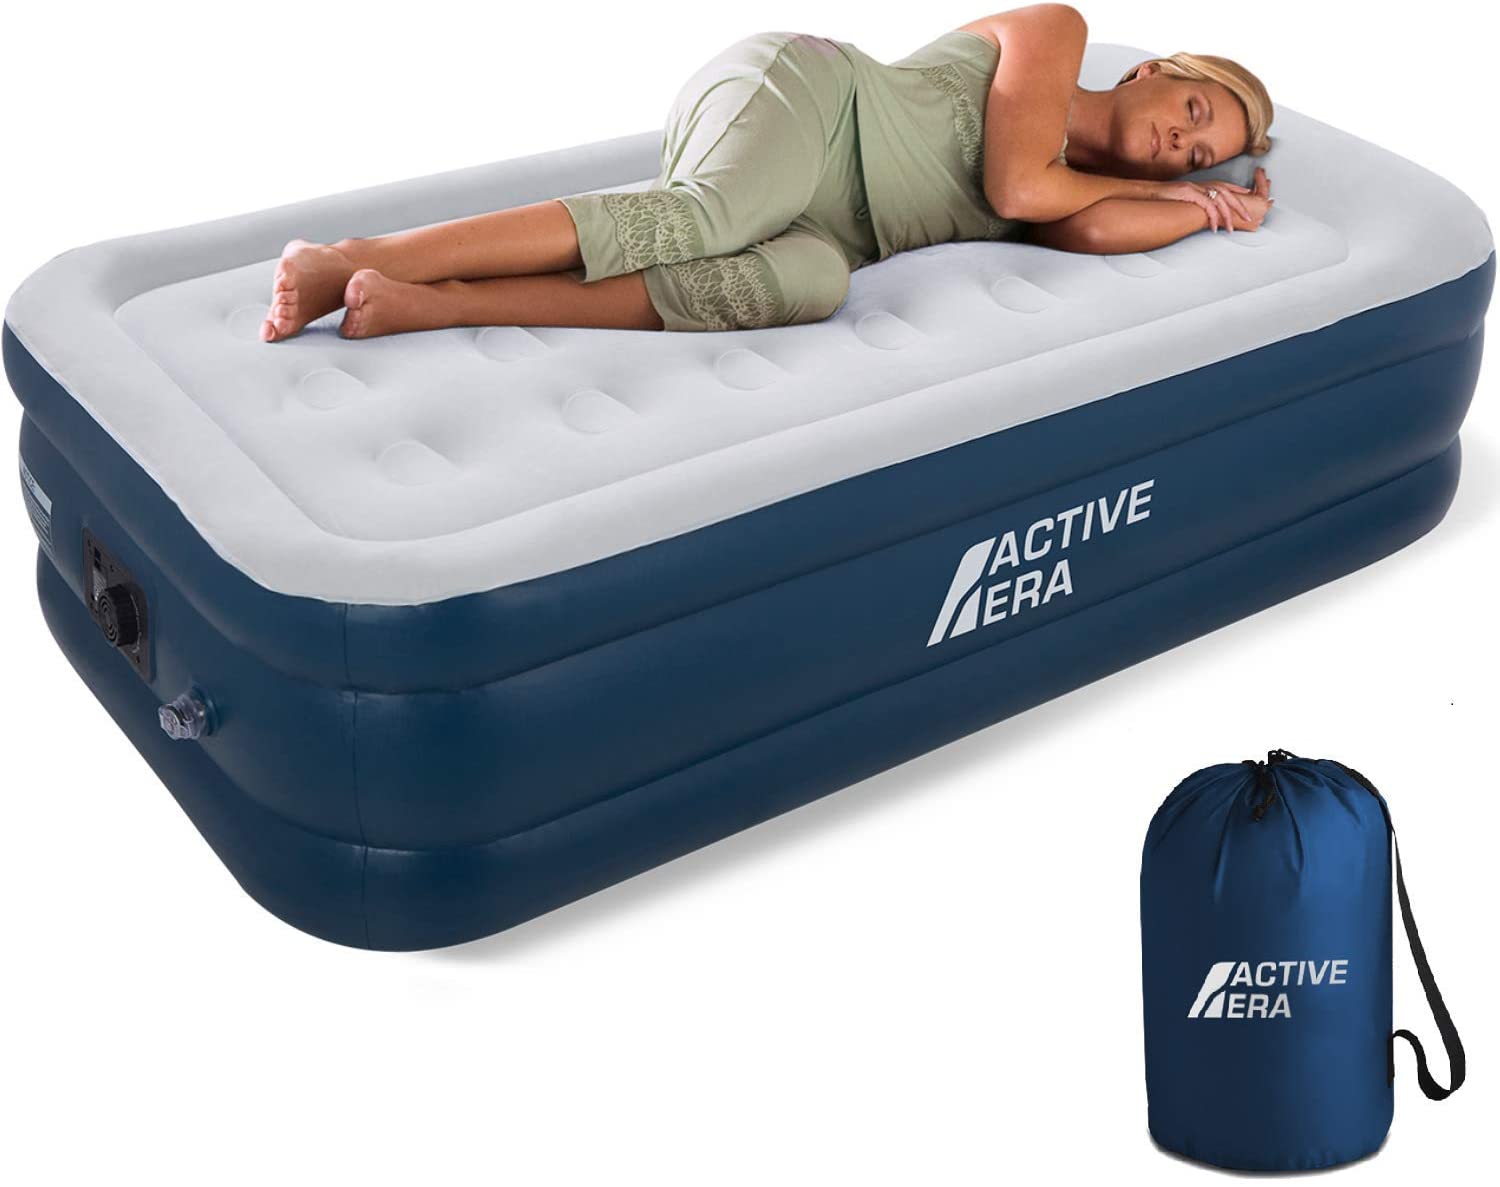 Air bed dimensions for this active era air bed enable one person to sleep comfortably.